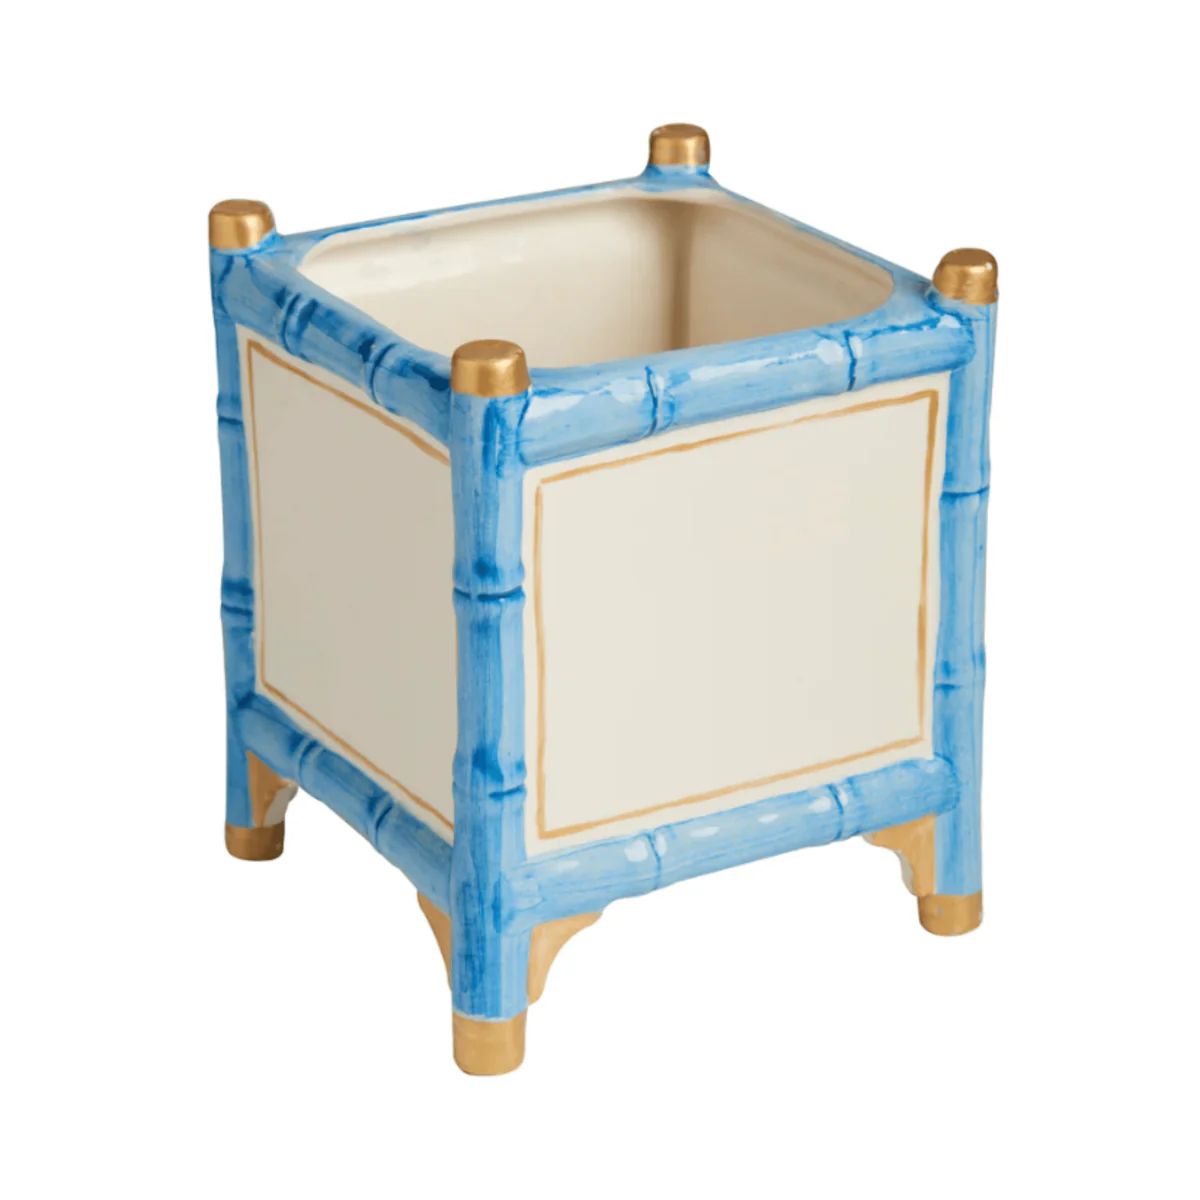 Blue & Gold Bamboo Inspired Cachepot - Available in Two Sizes | The Well Appointed House, LLC